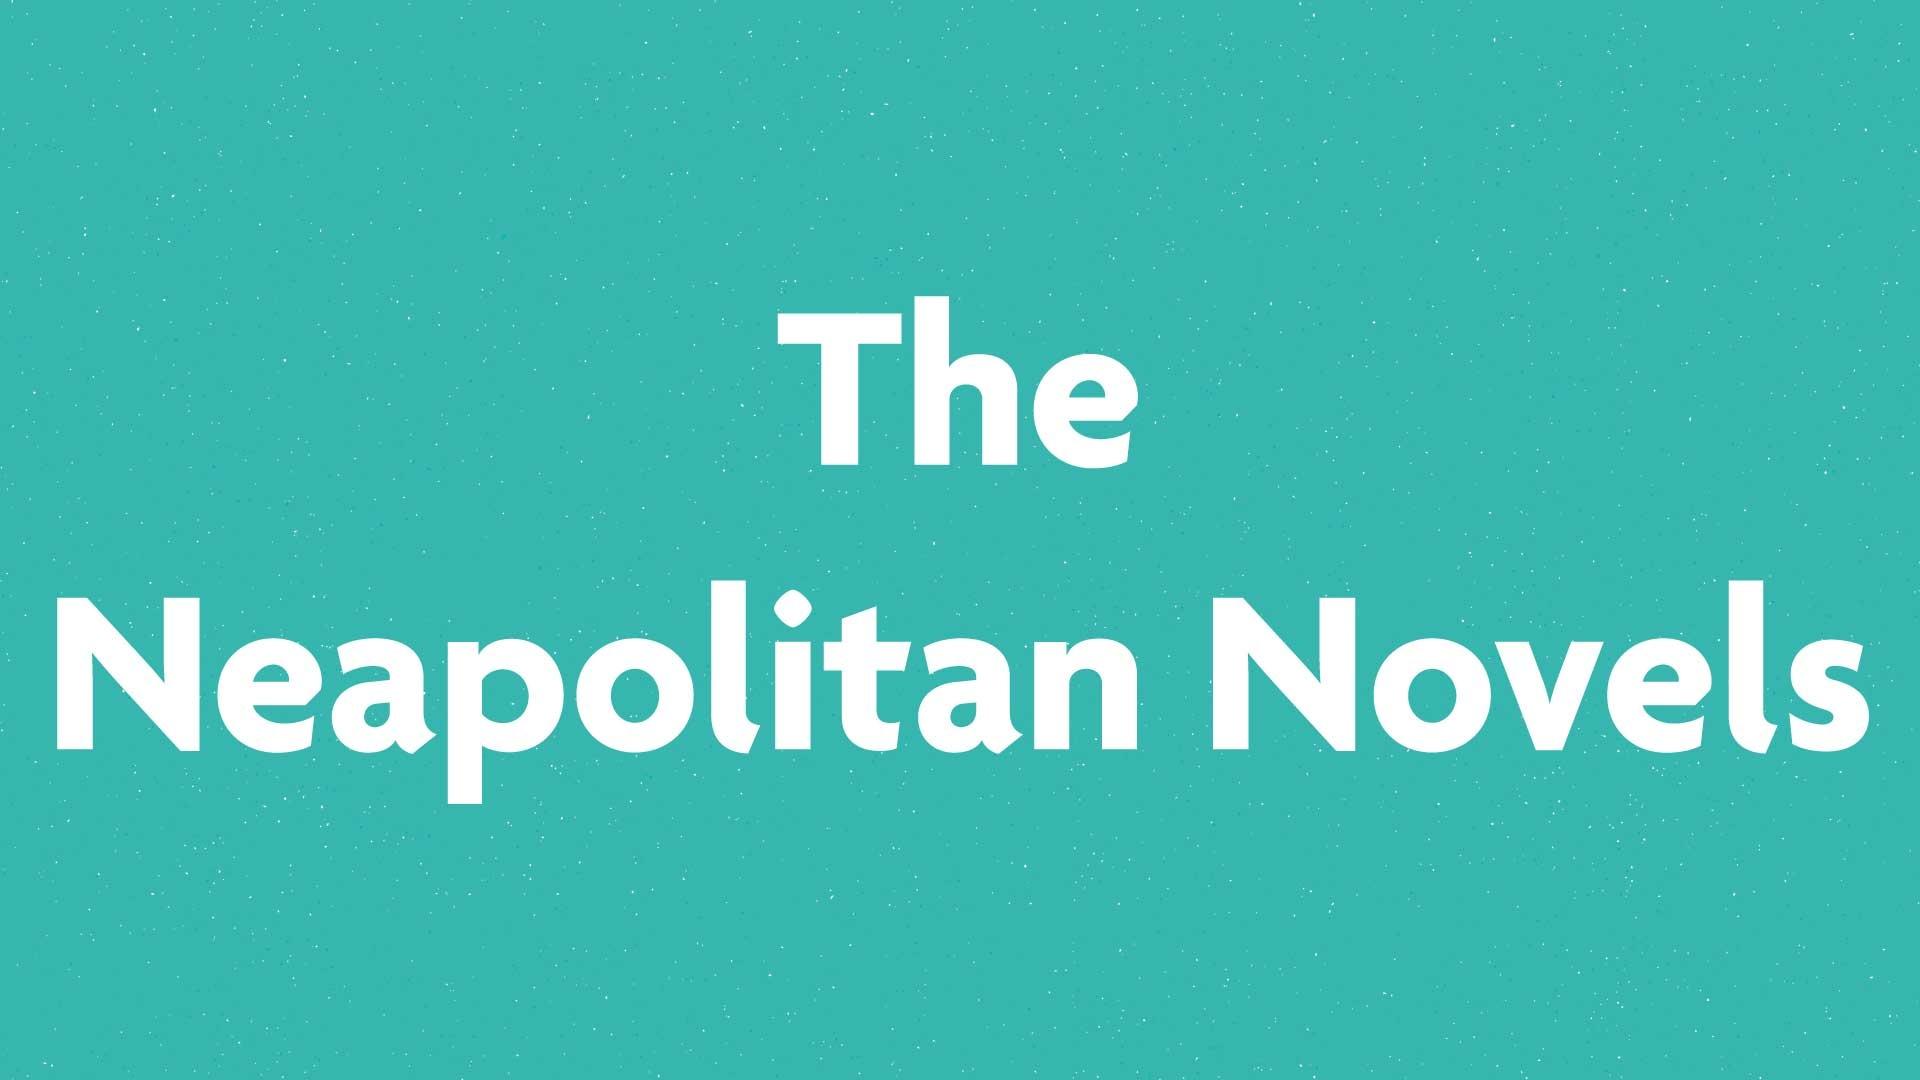 The Neapolitan Novels submission card on a green background.